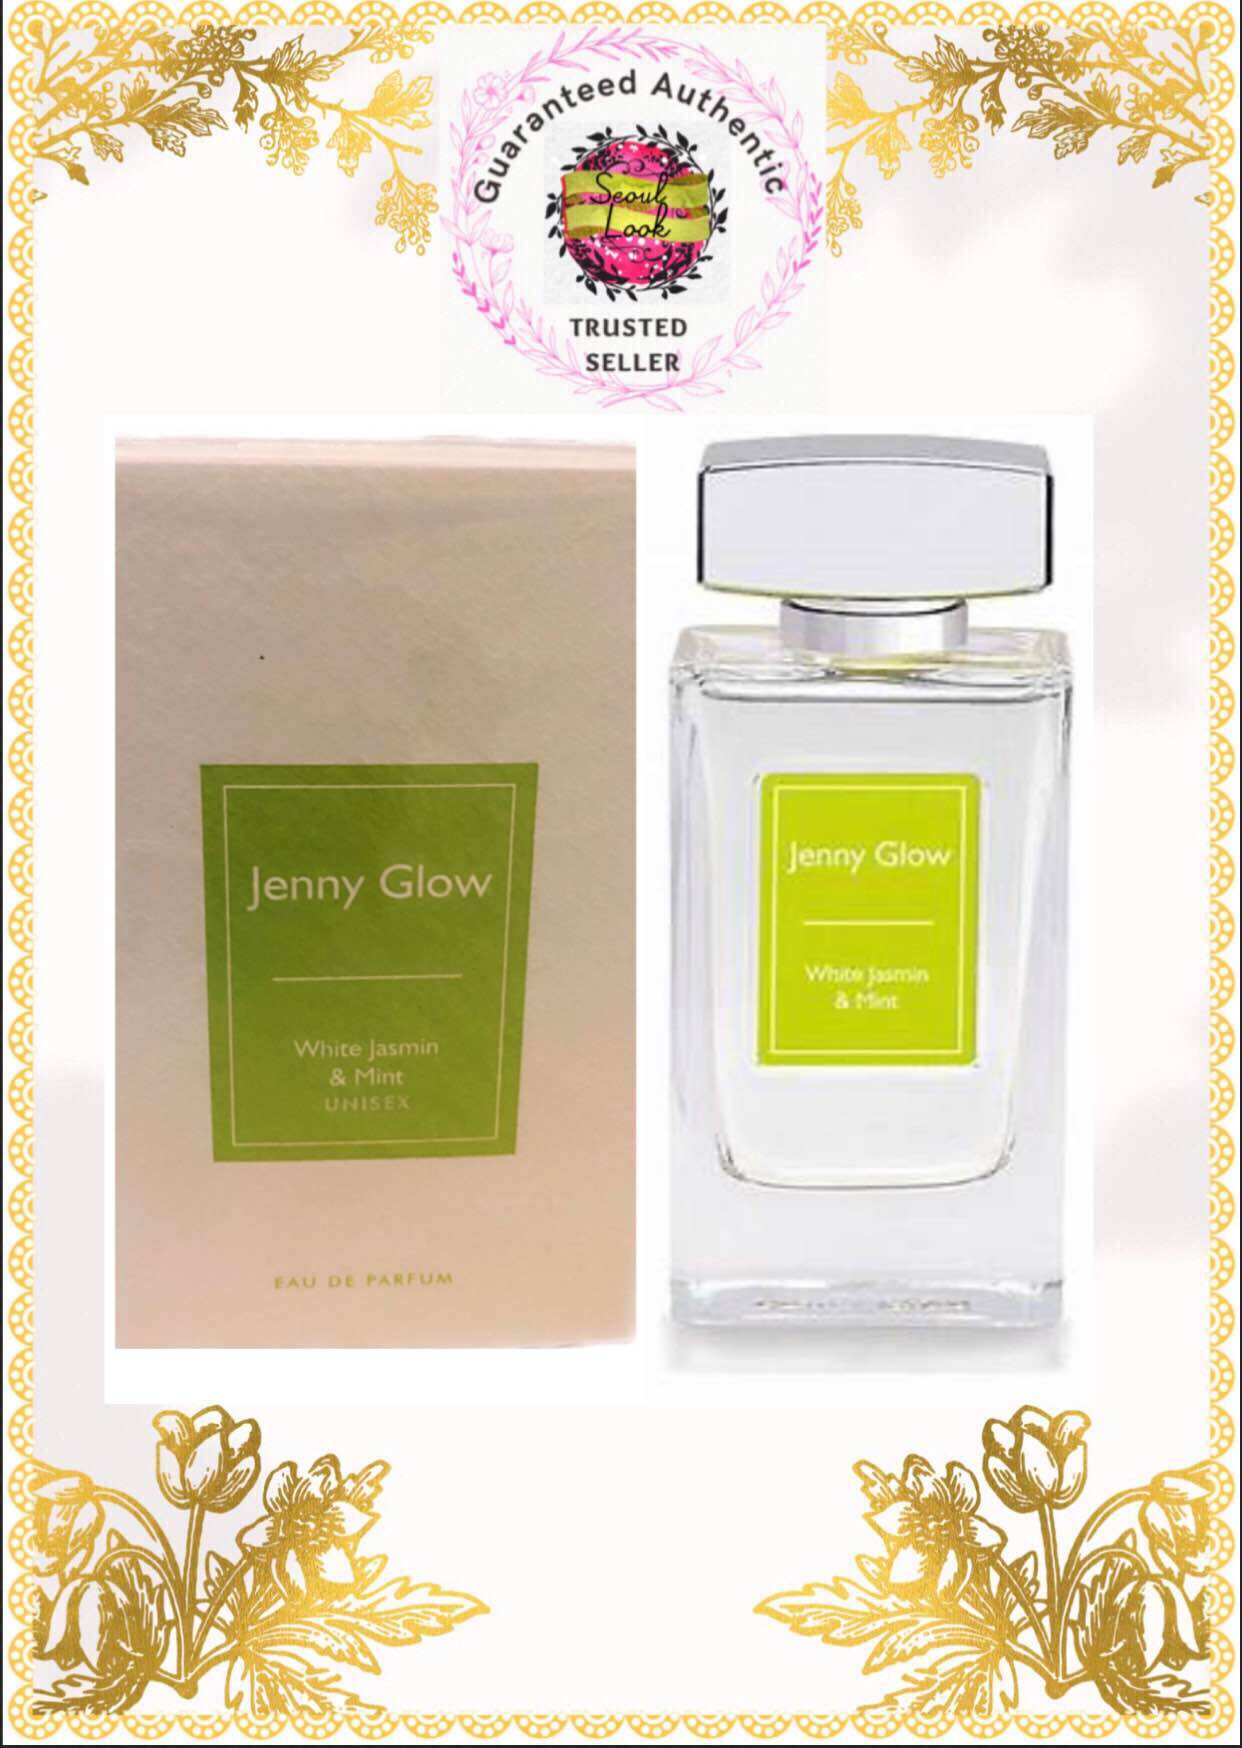 Jenny Glow: an advise? (Page 1) — Perfume Selection Tips for Women